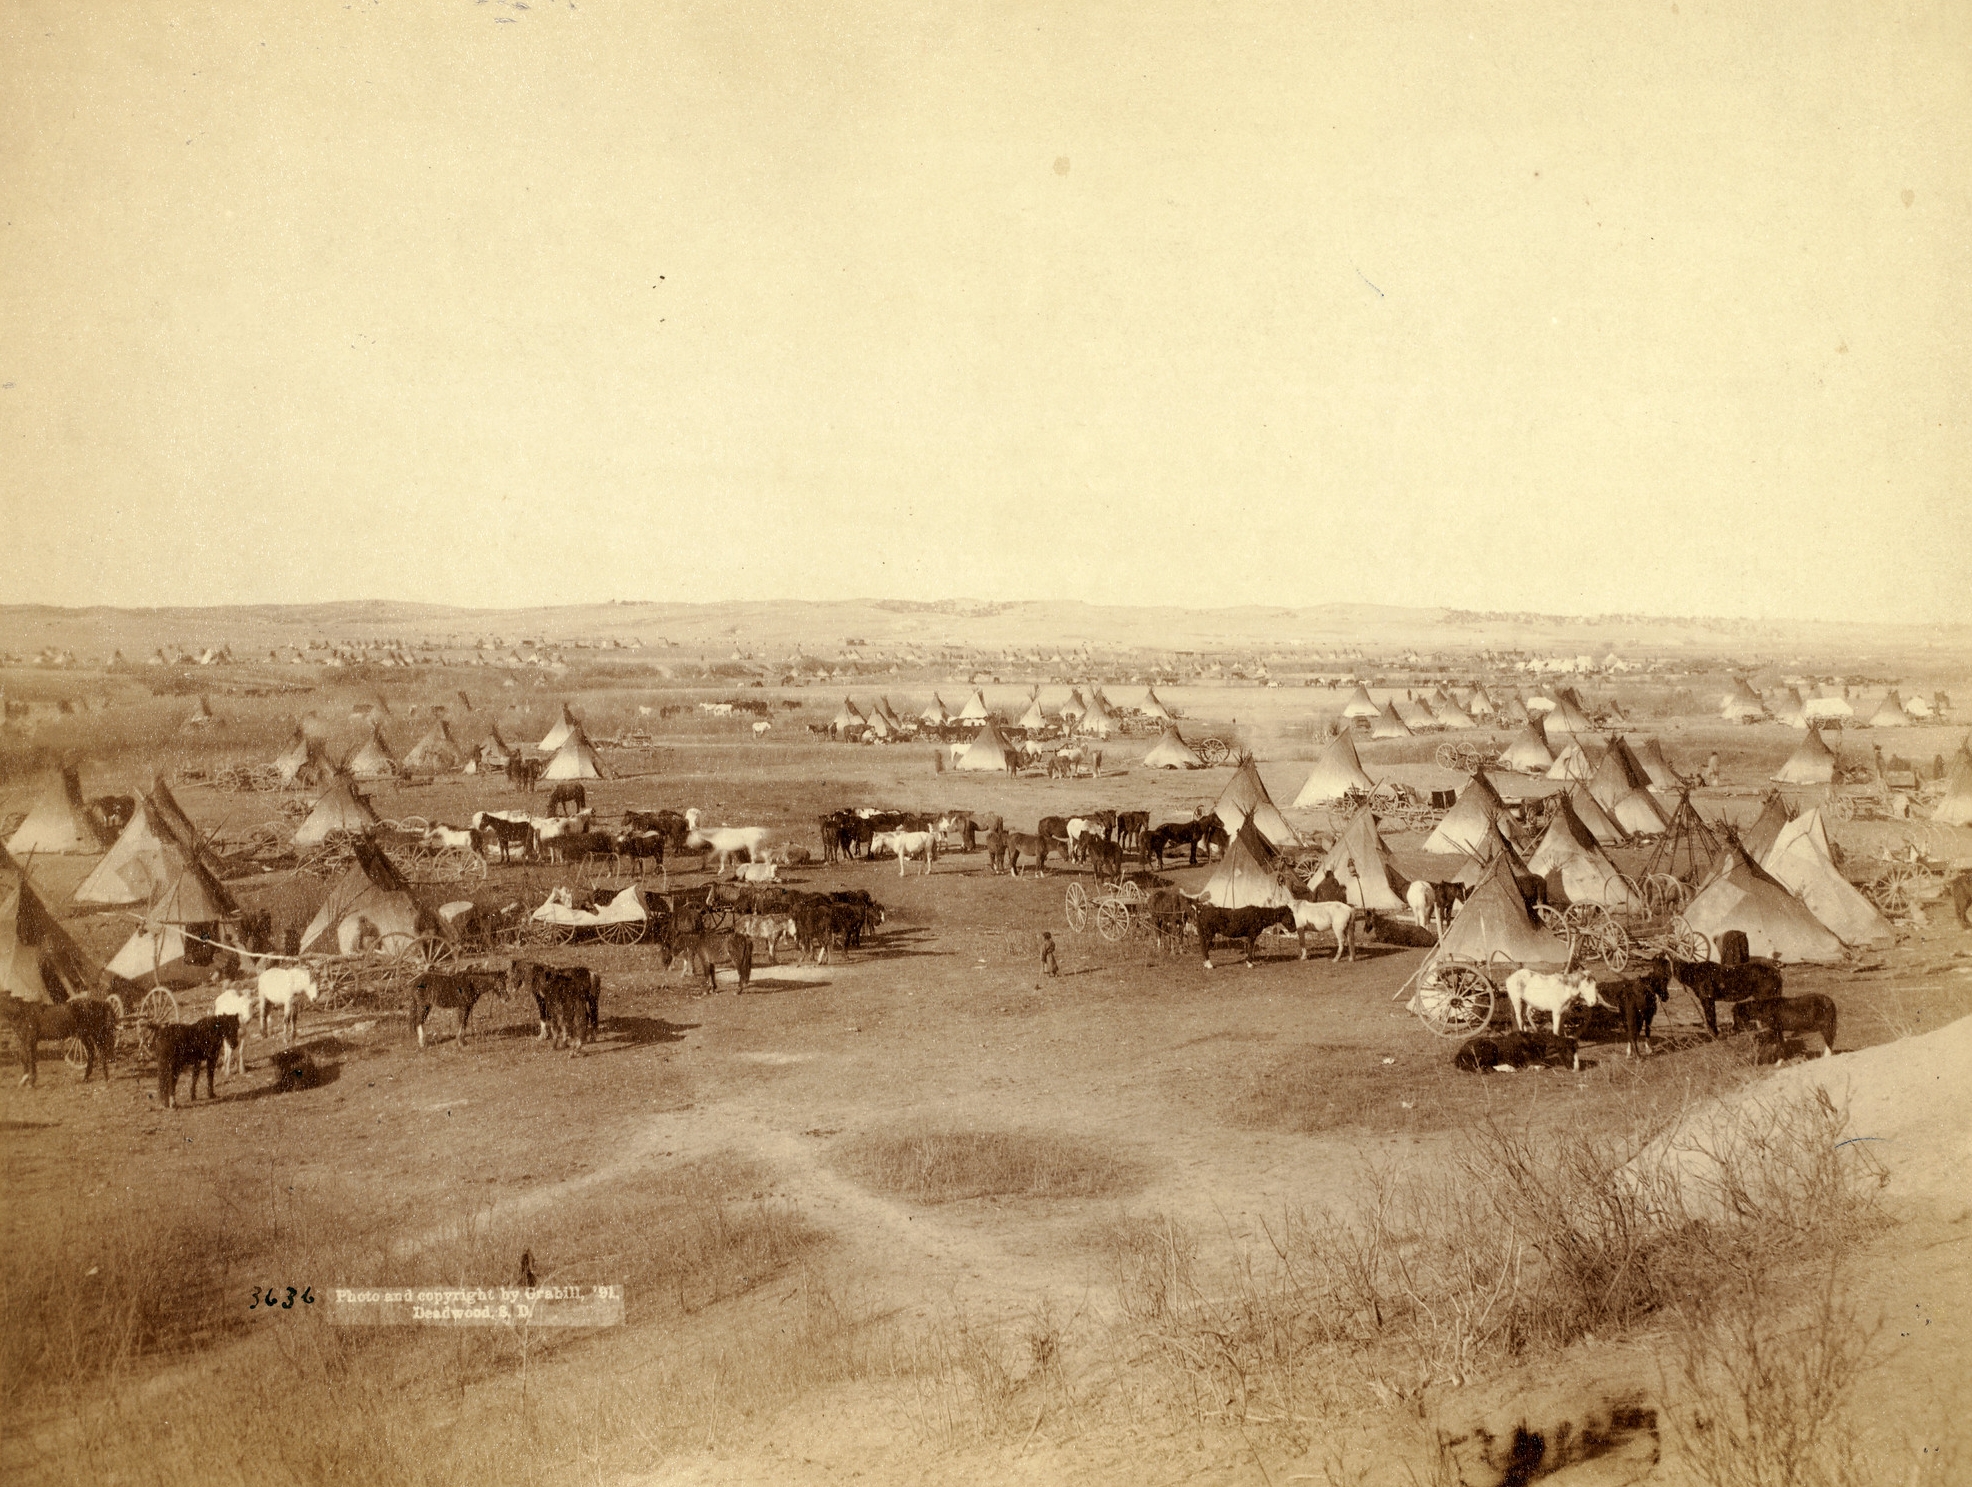 A large camp of Lakota Native Americans on or near the Pine Ridge Indian Reservation, 1891.